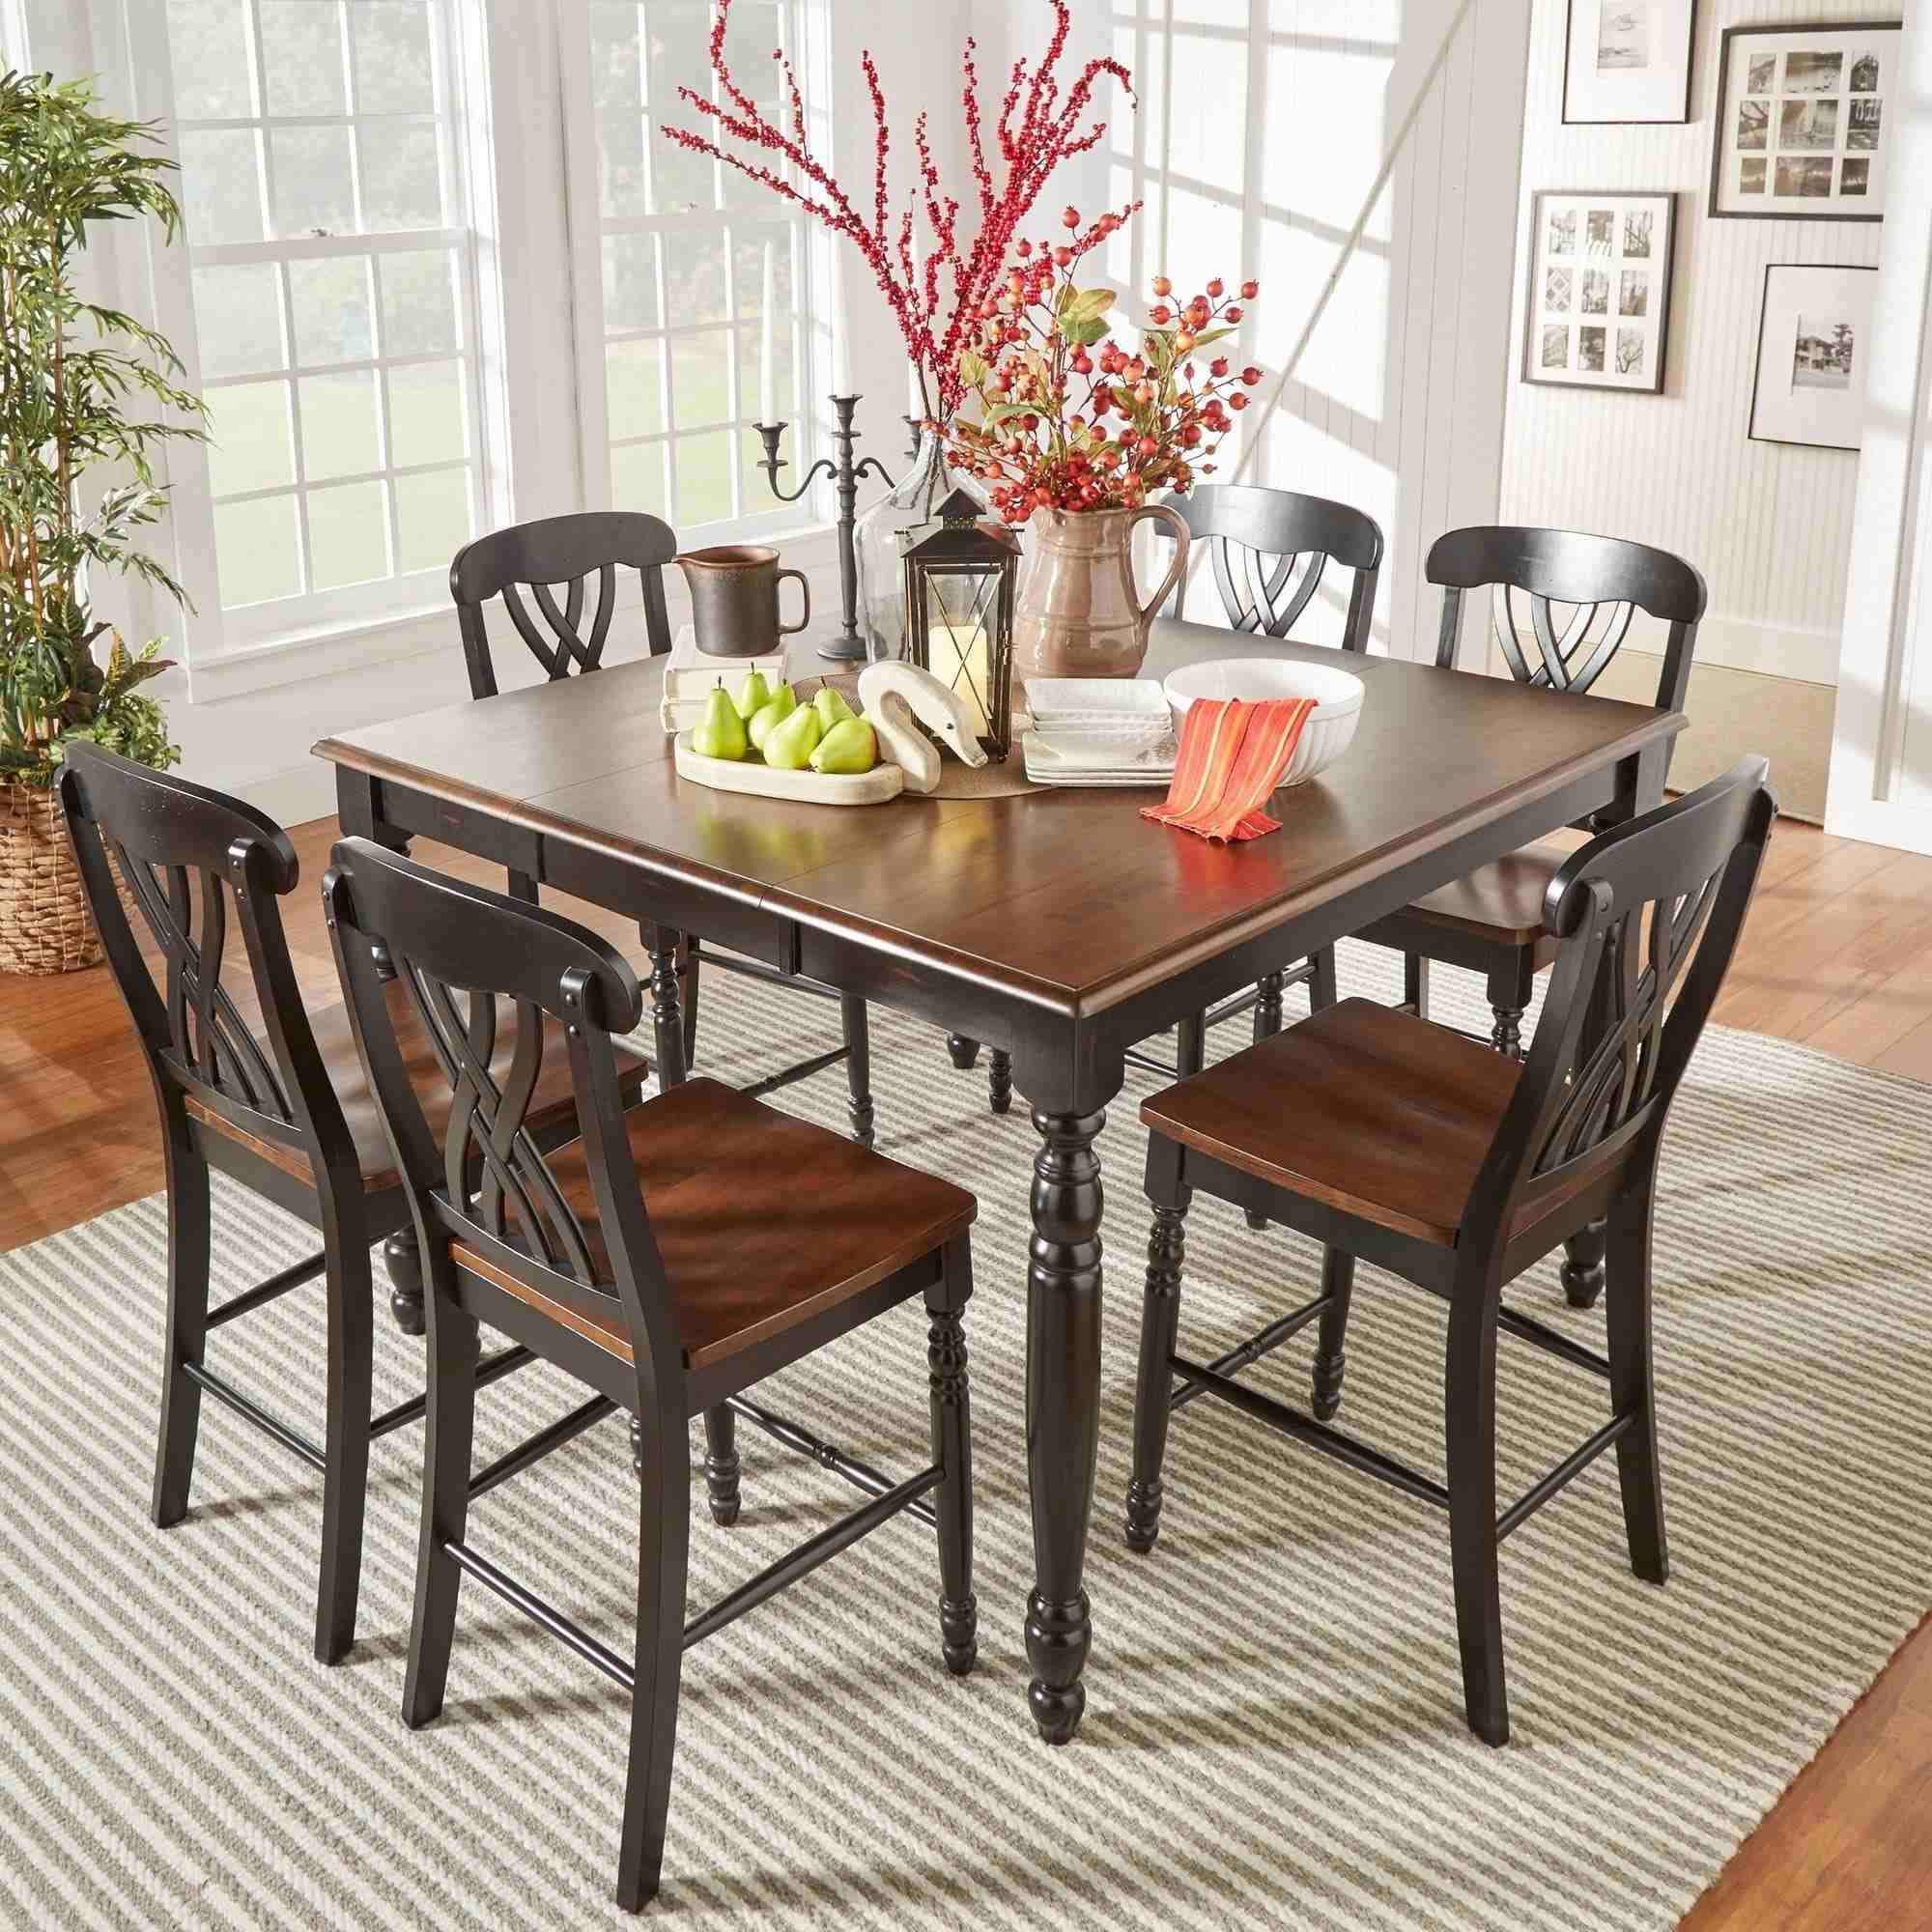 Dining Room Chairs Kijiji Calgary 2019 Home Design with regard to dimensions 2000 X 2000